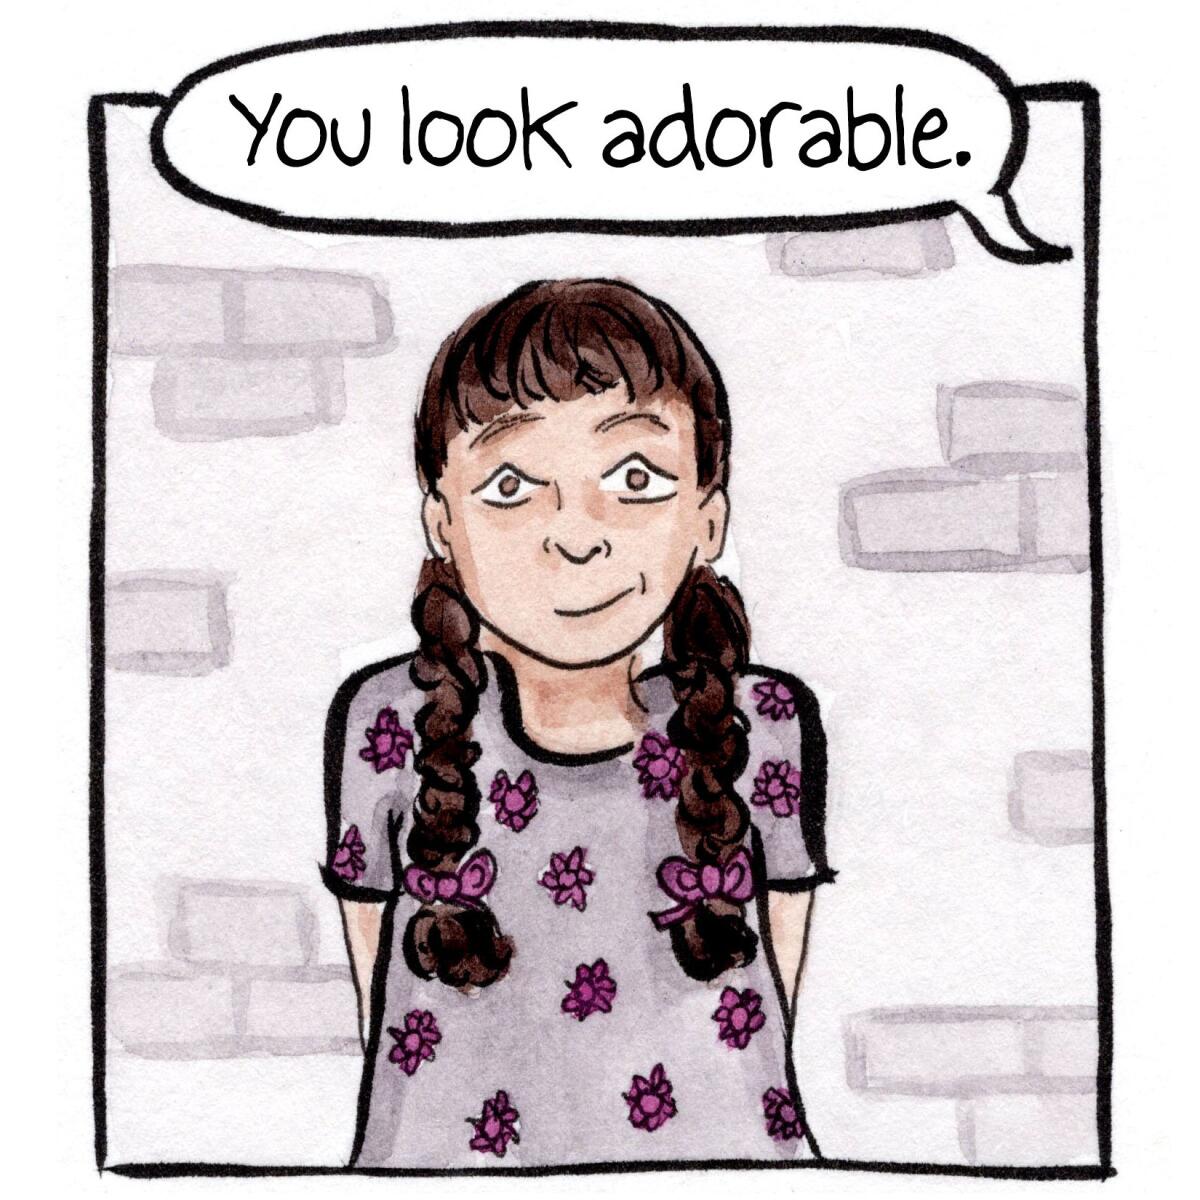 Someone says, "You look adorable!" to a boy wearing a flower-print T-shirt and long braids.